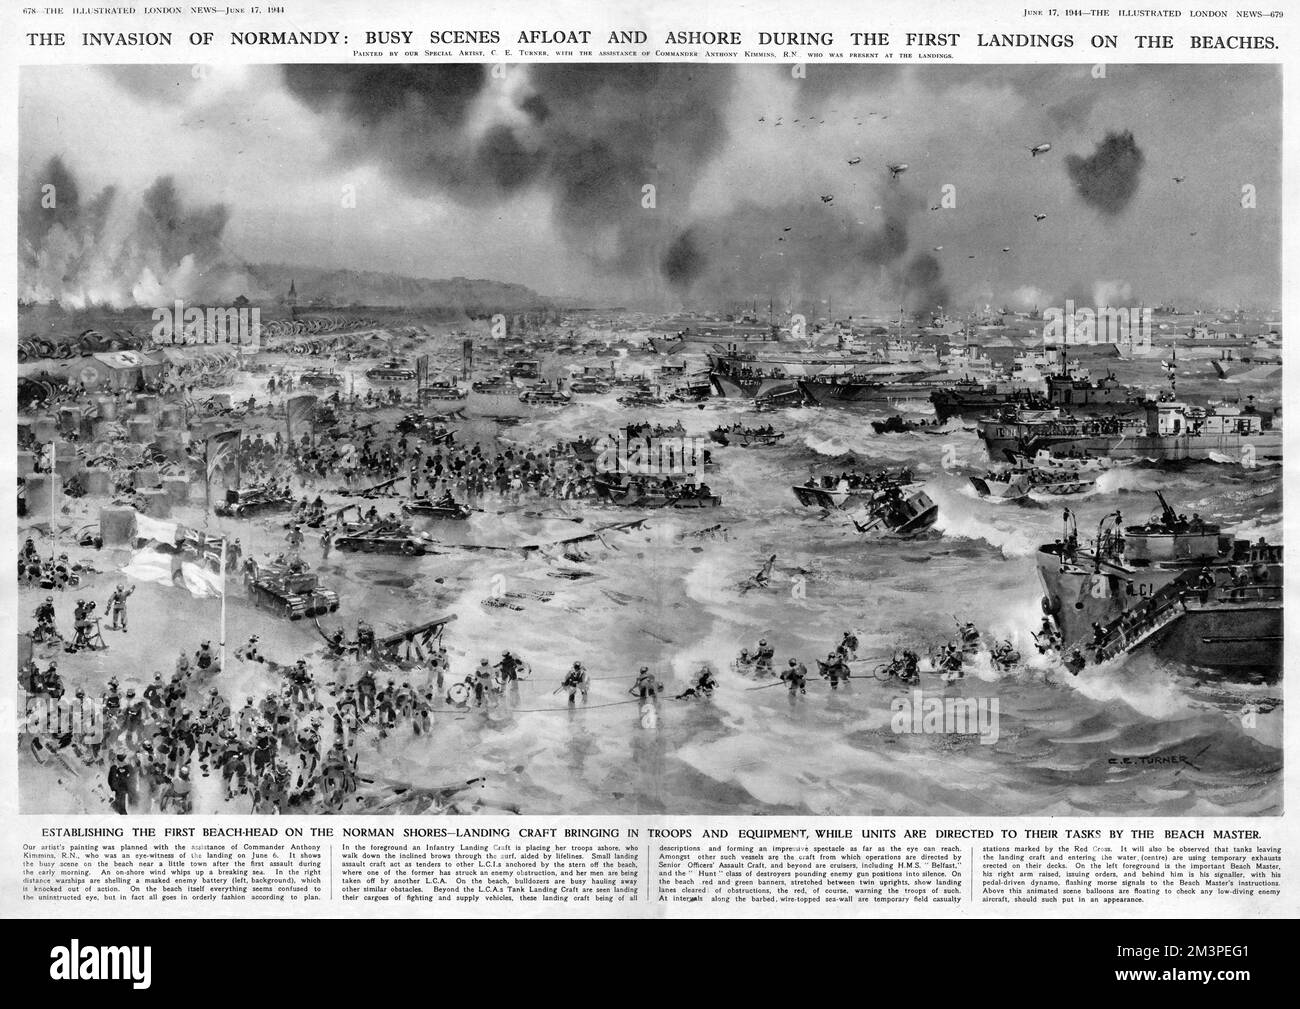 A depiction by C.E.Turner of a scene during the early morning of 6th June 1944 as British forces make an amphibious landing on one of the Normandy beaches during D-Day. The scene is a mass of men, landing craft, ships and all manner of tanks and other vehicles being offloaded onto the beach. To the lower left can be seen the important Beach Master (arm raised), issuing orders, sometimes conveyed by the morse code signaller behind him, his light powered by a pedalled dynamo.Though the artist was not present, his work was based on the eye-witness account of Commander Antony Kimmins of the Royal Stock Photo